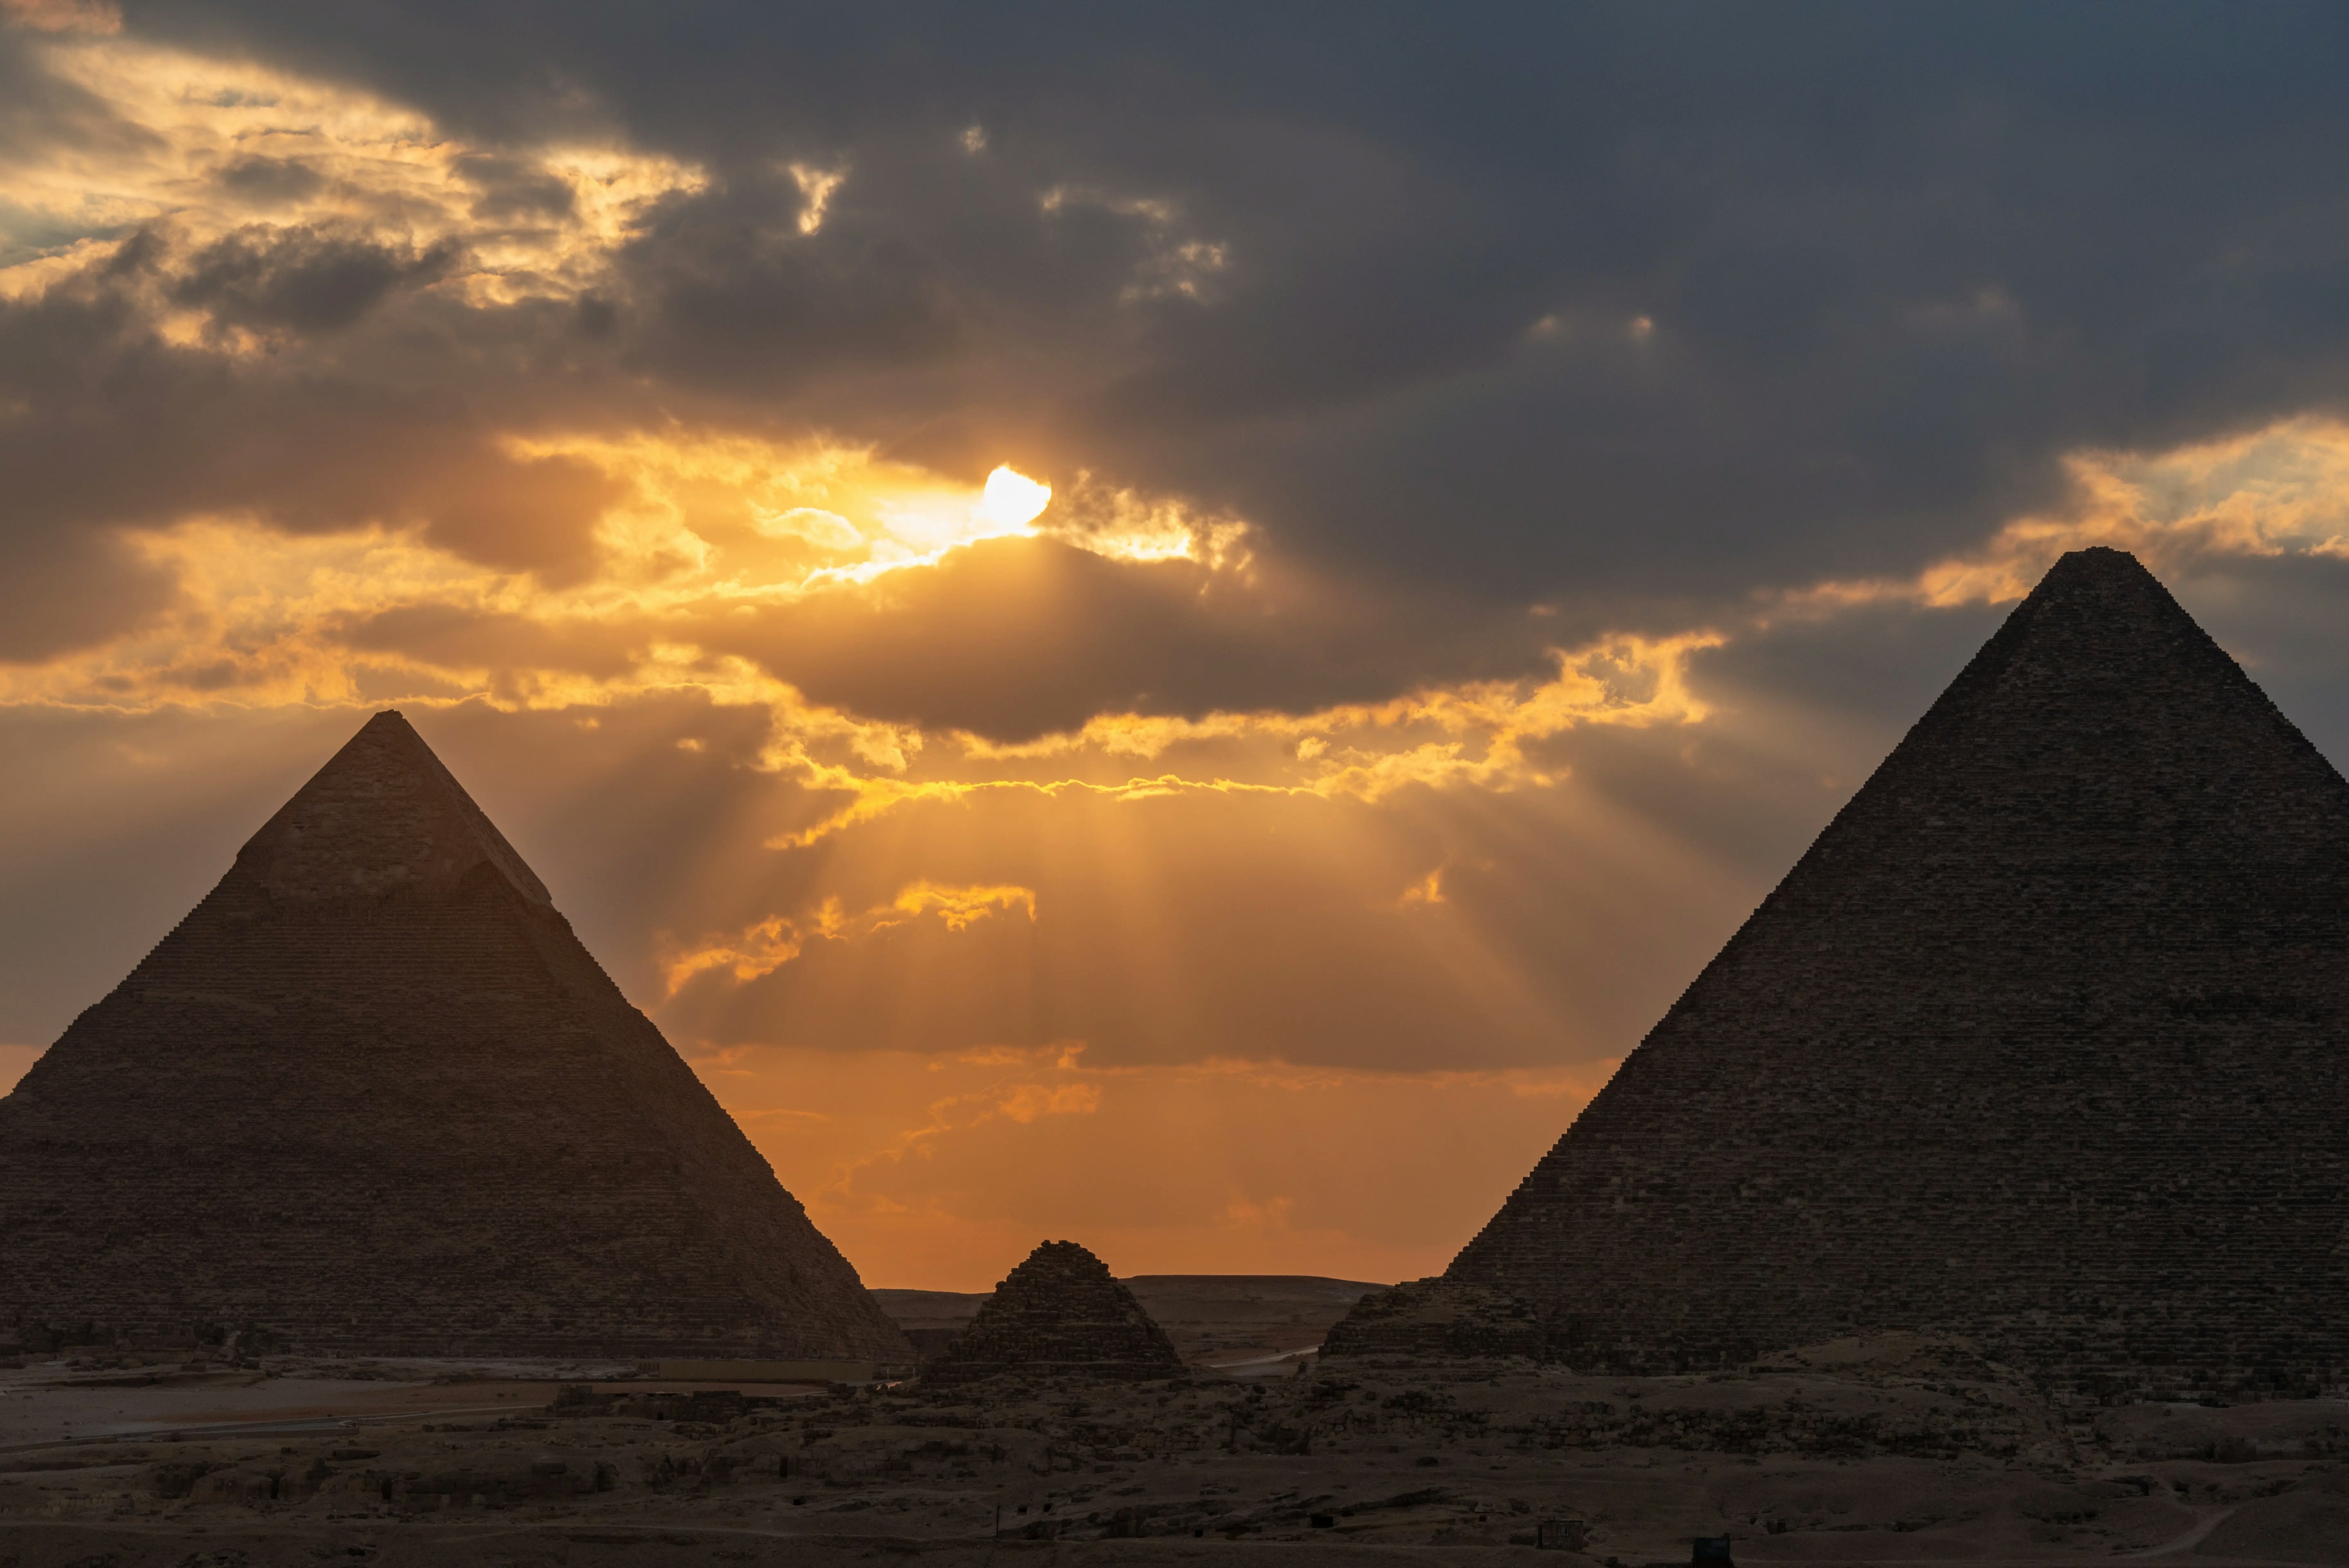 Unforgettable Encounter With The Pyramids Of Giza